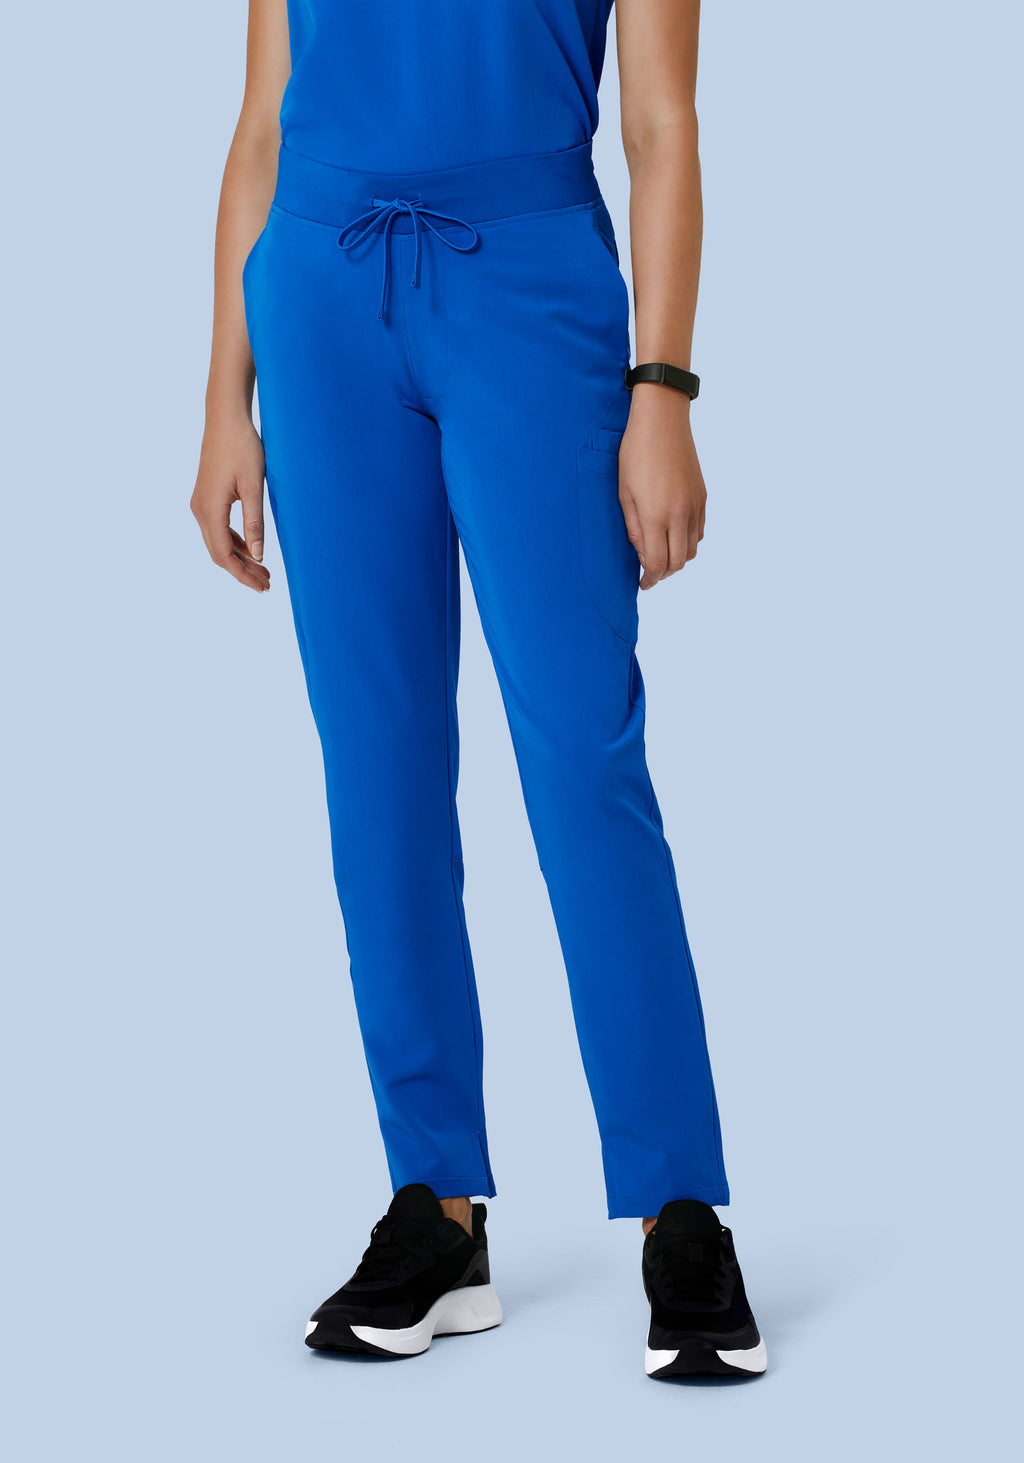 Mandala Miami Pants for women in the color Sky Blue